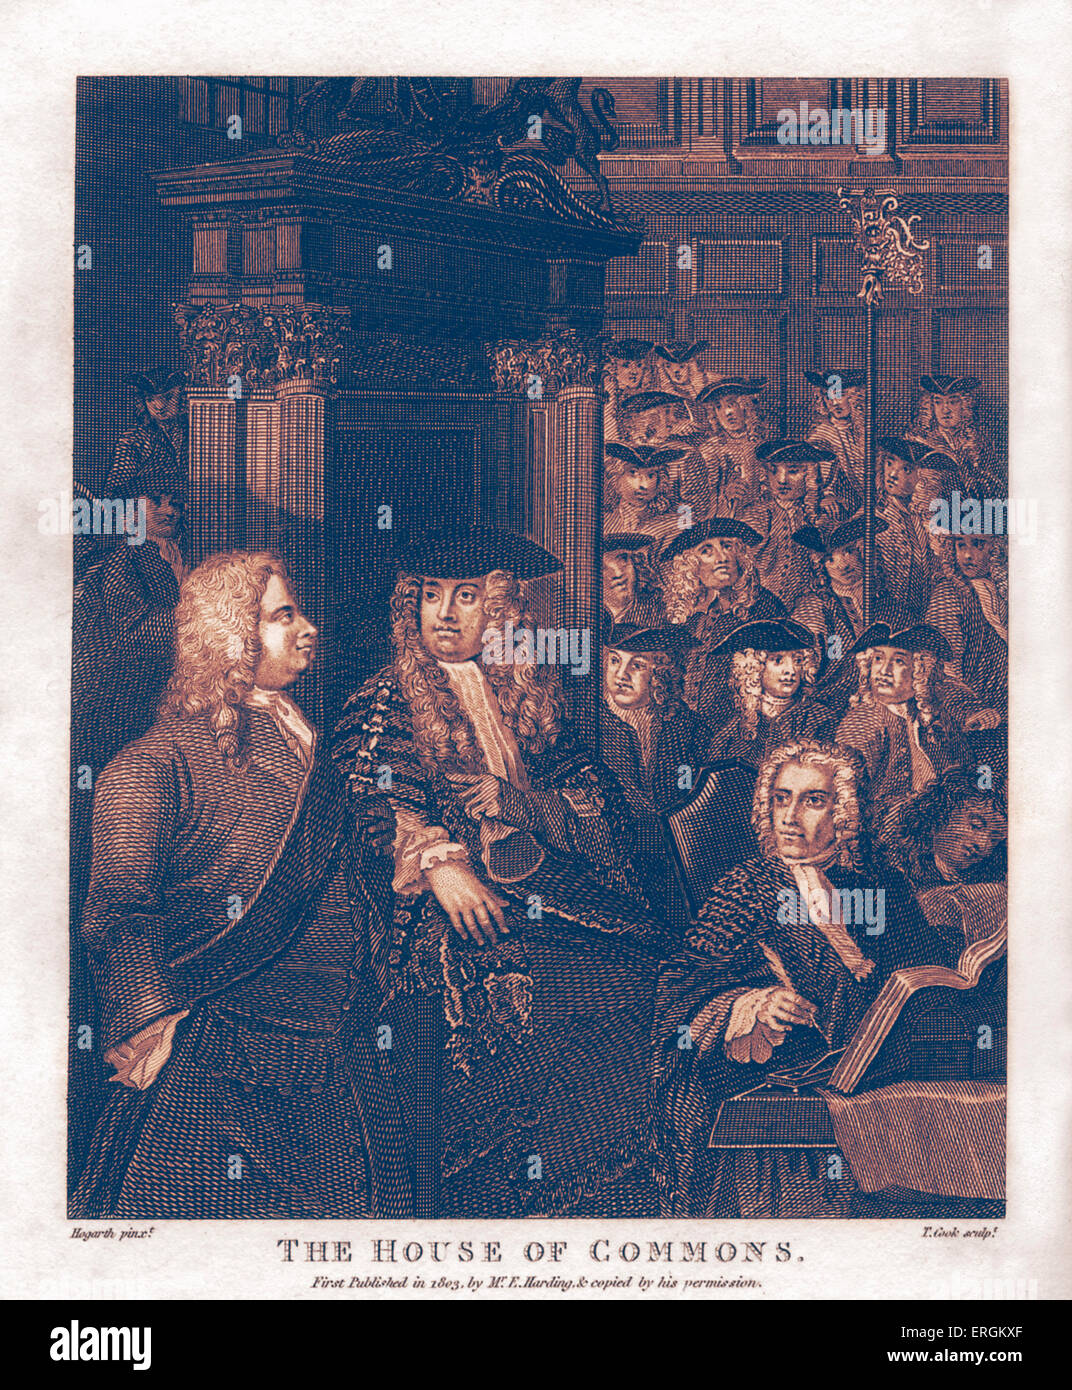 The House of Commons by William Hogarth, 1803. Engraved by Thomas Cook. Gathered are: Arthur Onslow (1691-1768), then speaker of the house; Robert Walpole (1676-1745), left, Britian's first Prime Minister; Sidney Godolphin (1652-1732), right, the so called 'Father of the House'. Stock Photo